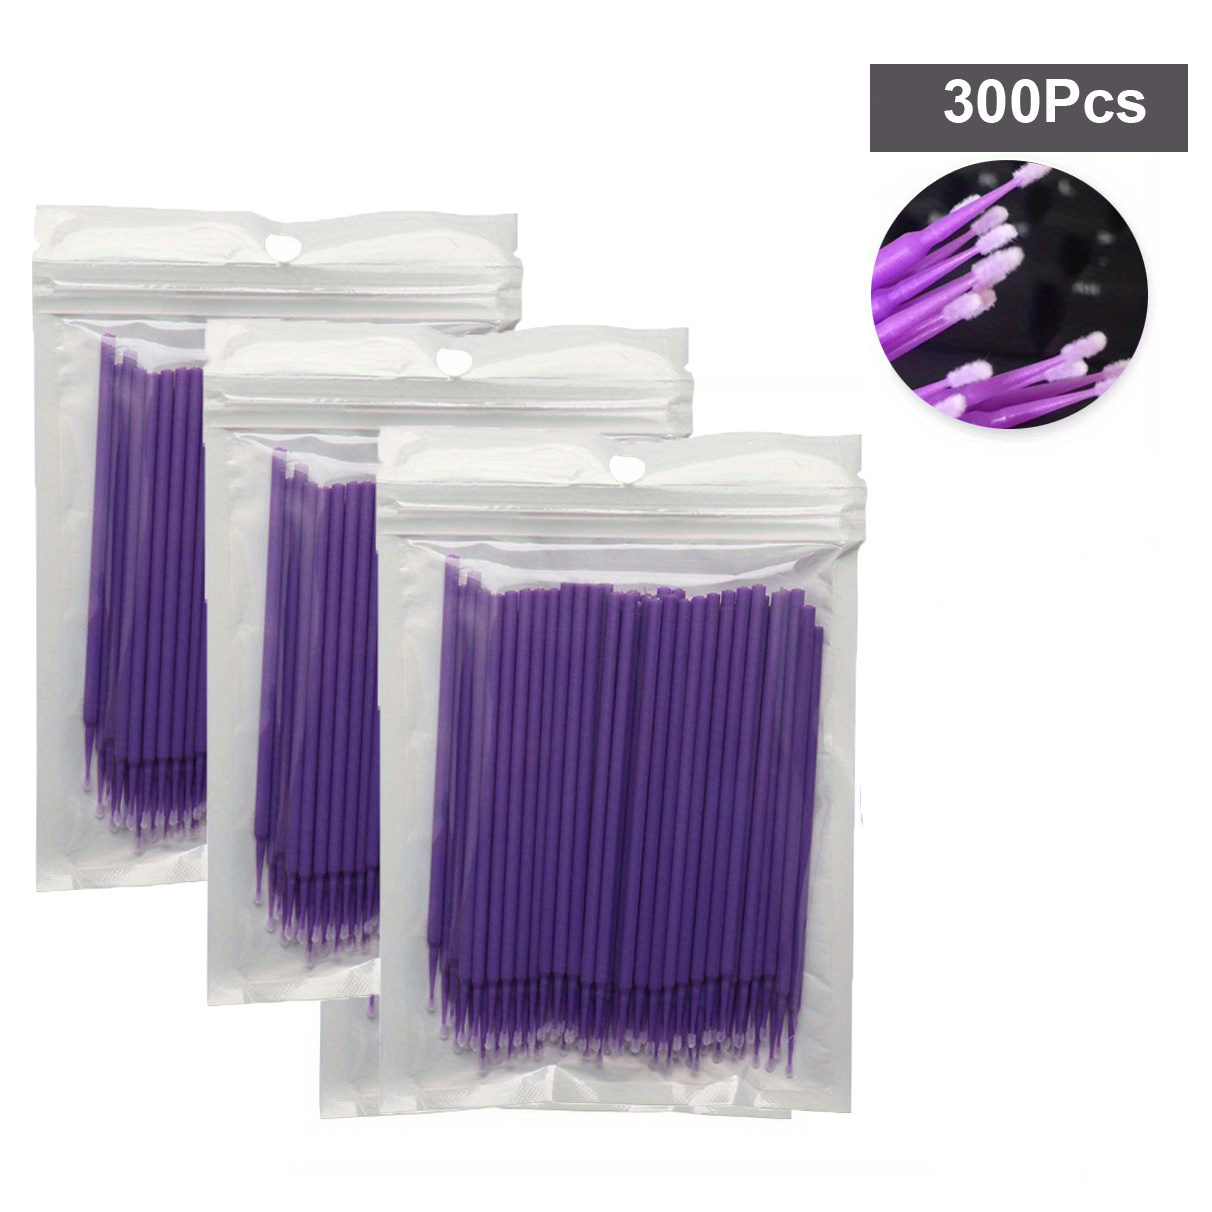 Touch Up Paint Brushes 100 Pack of 2.5mm Disposable Micro Applicators for  Automotive Paint Chip Repair Car Gap Cleaning Blue 